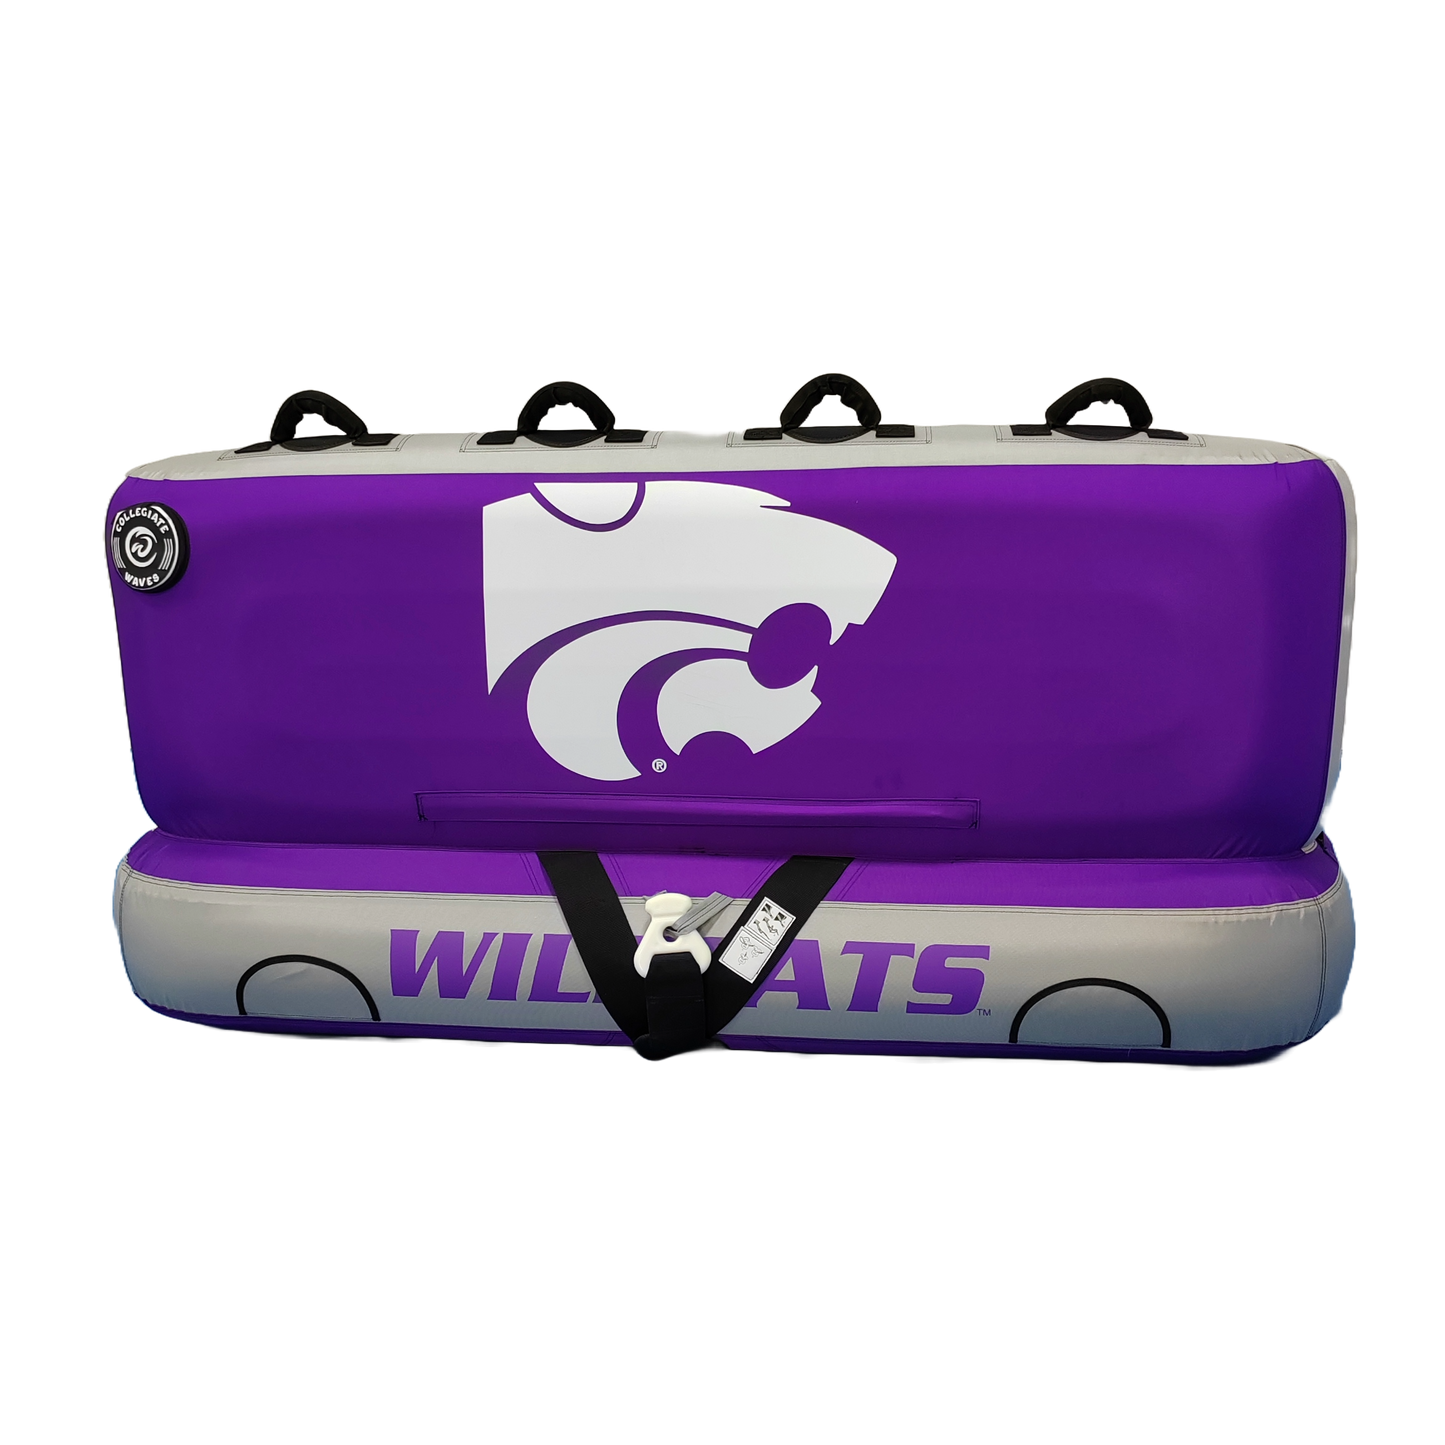 K-State "The Coach" Towable Tube